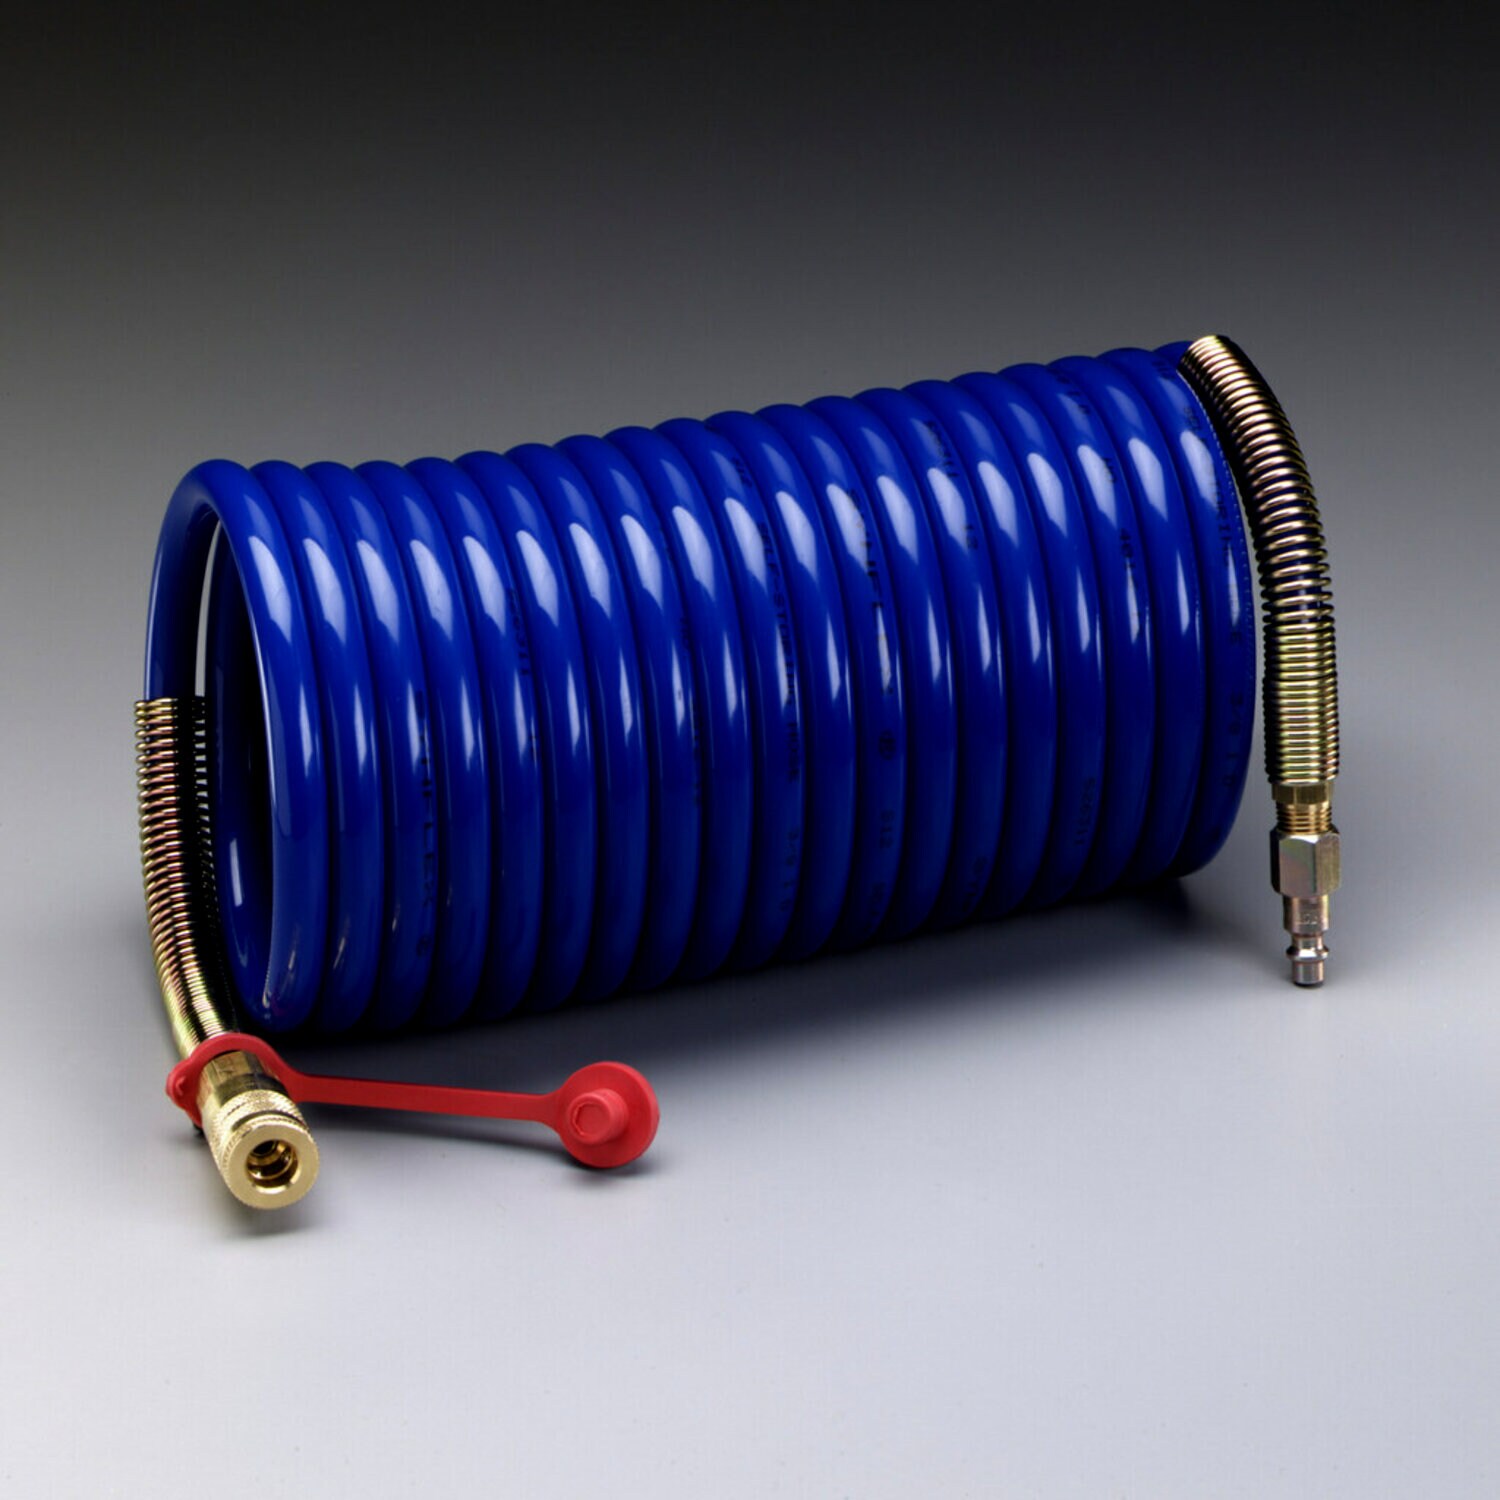 7010385738 - 3M Supplied Air Hose W-2929SR-100, 100 ft, 3/8 in ID, Schrader
Fittings, High Pressure, Coiled 1 EA/Case